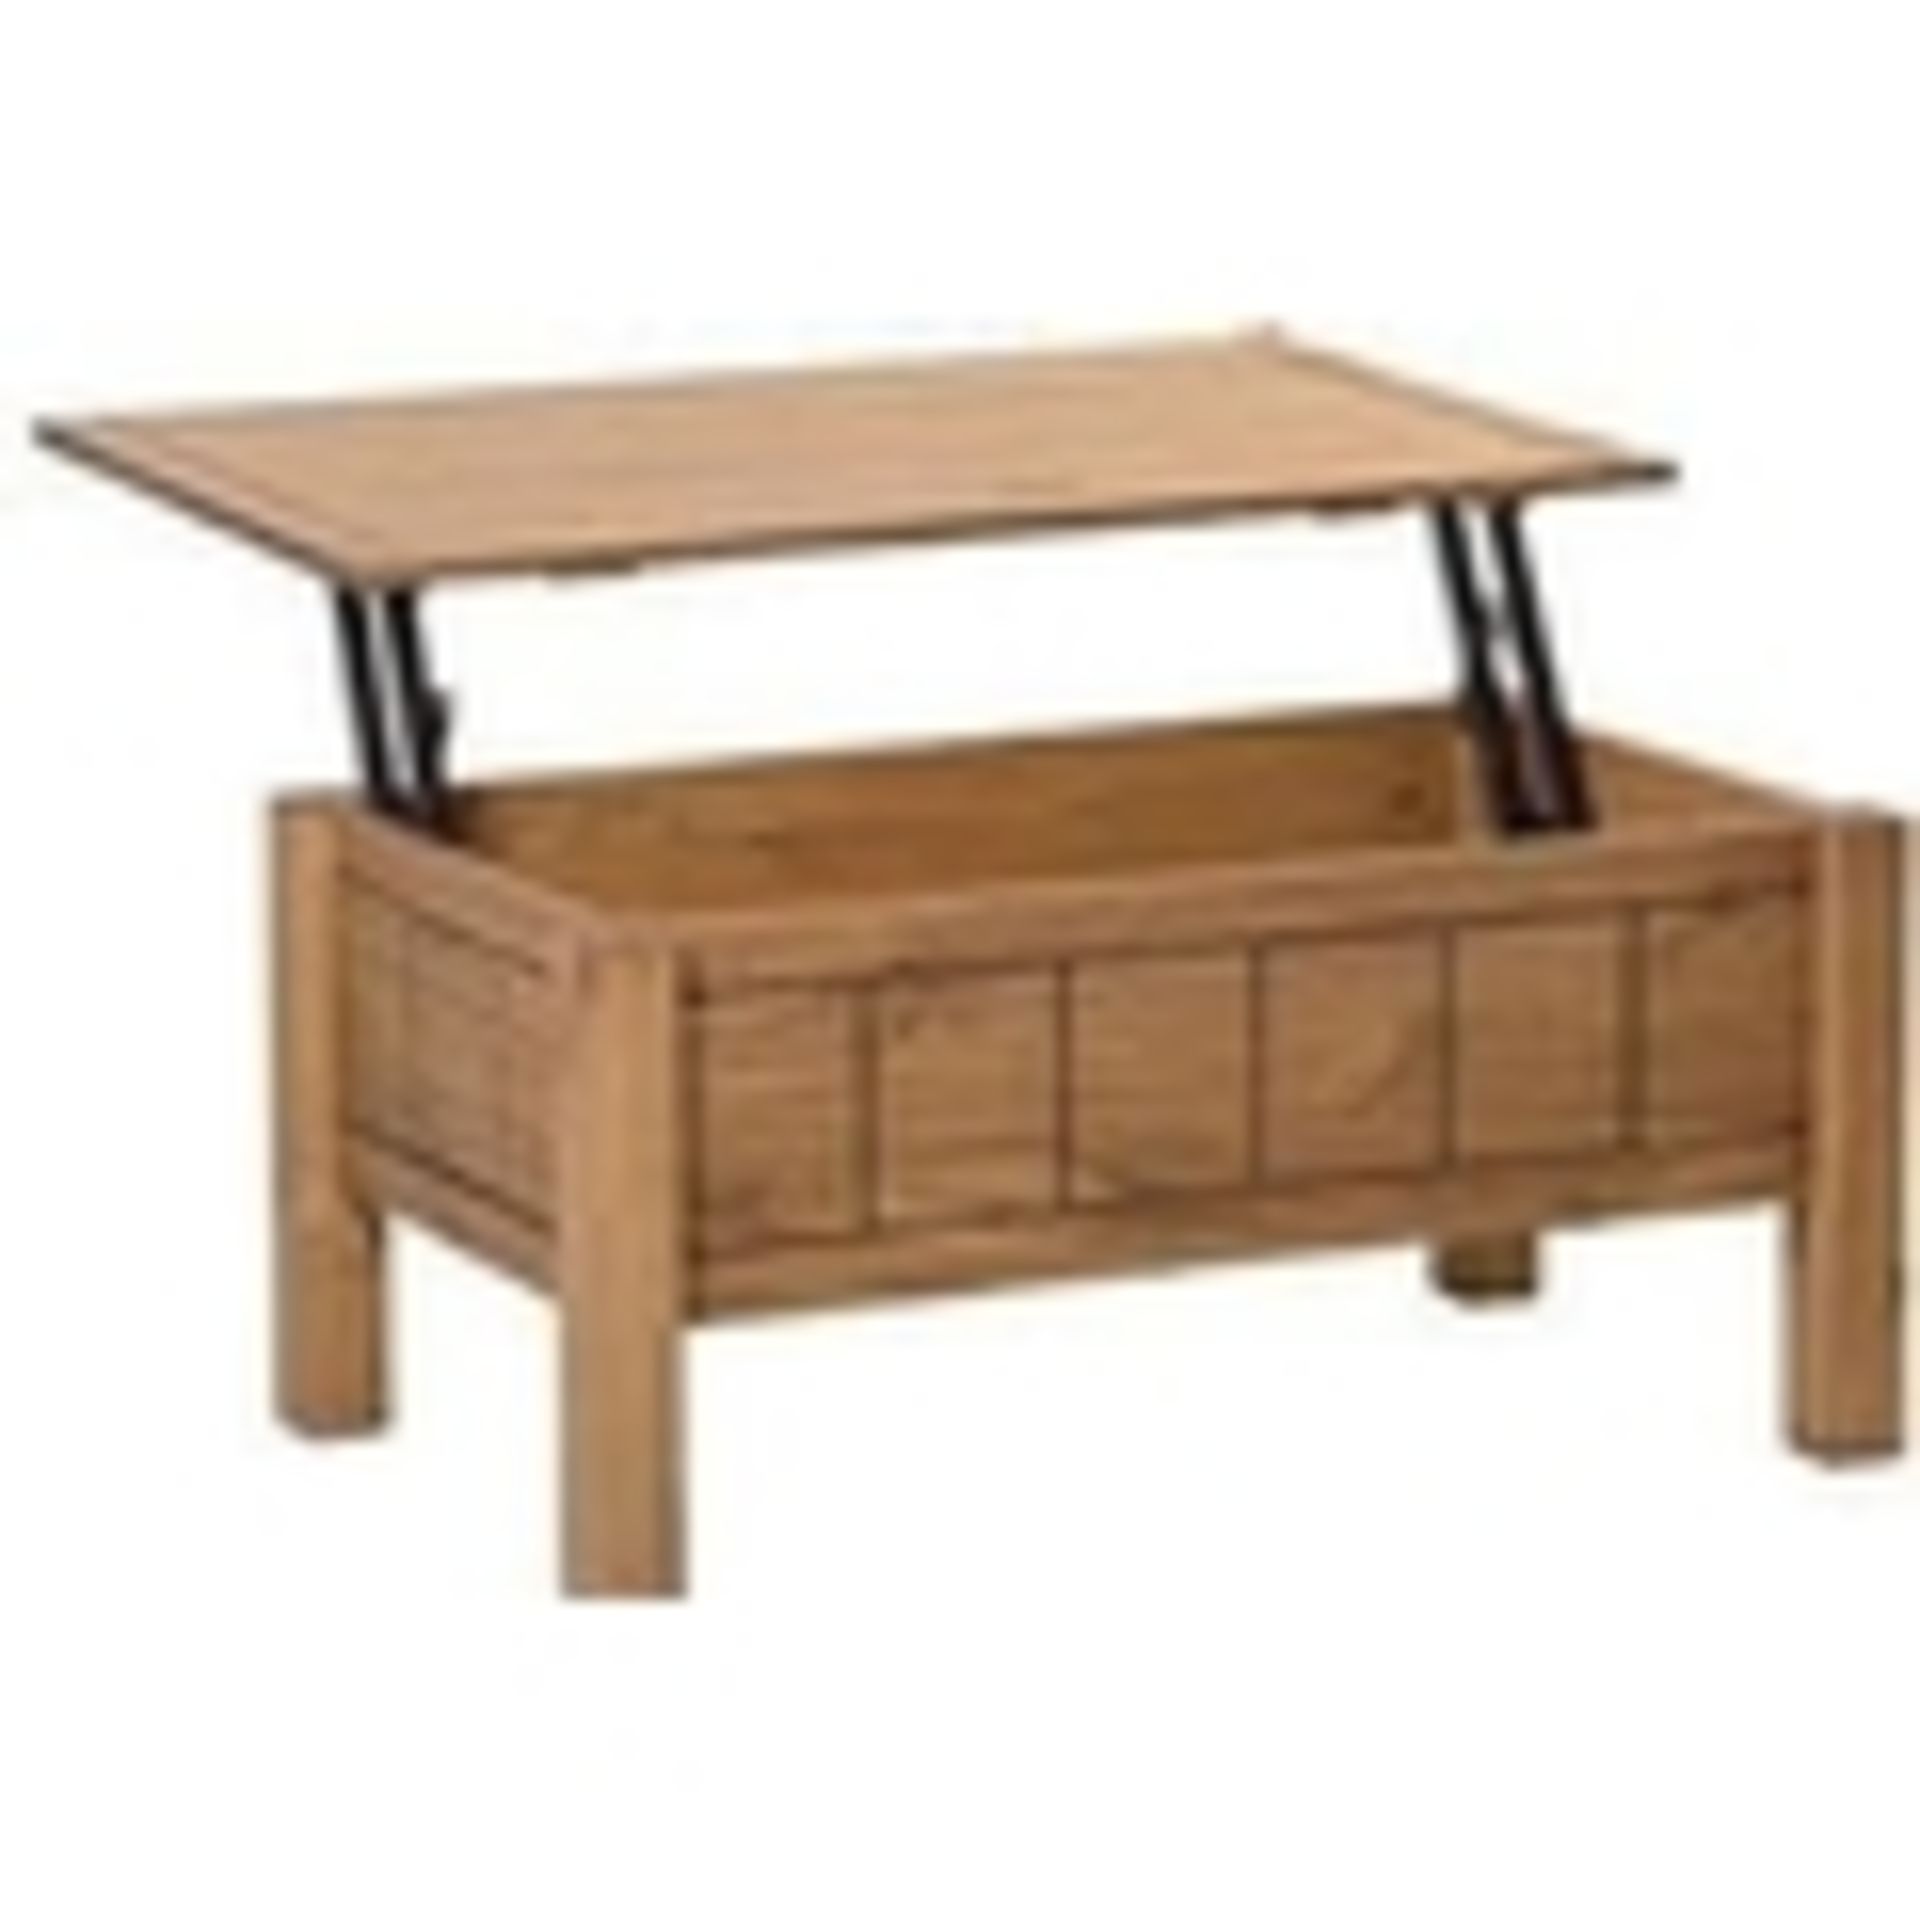 1 BRAND NEW BOXED CORONA MEXICAN DESIGN SOLID PINE LIFT UP COFFEE TABLE